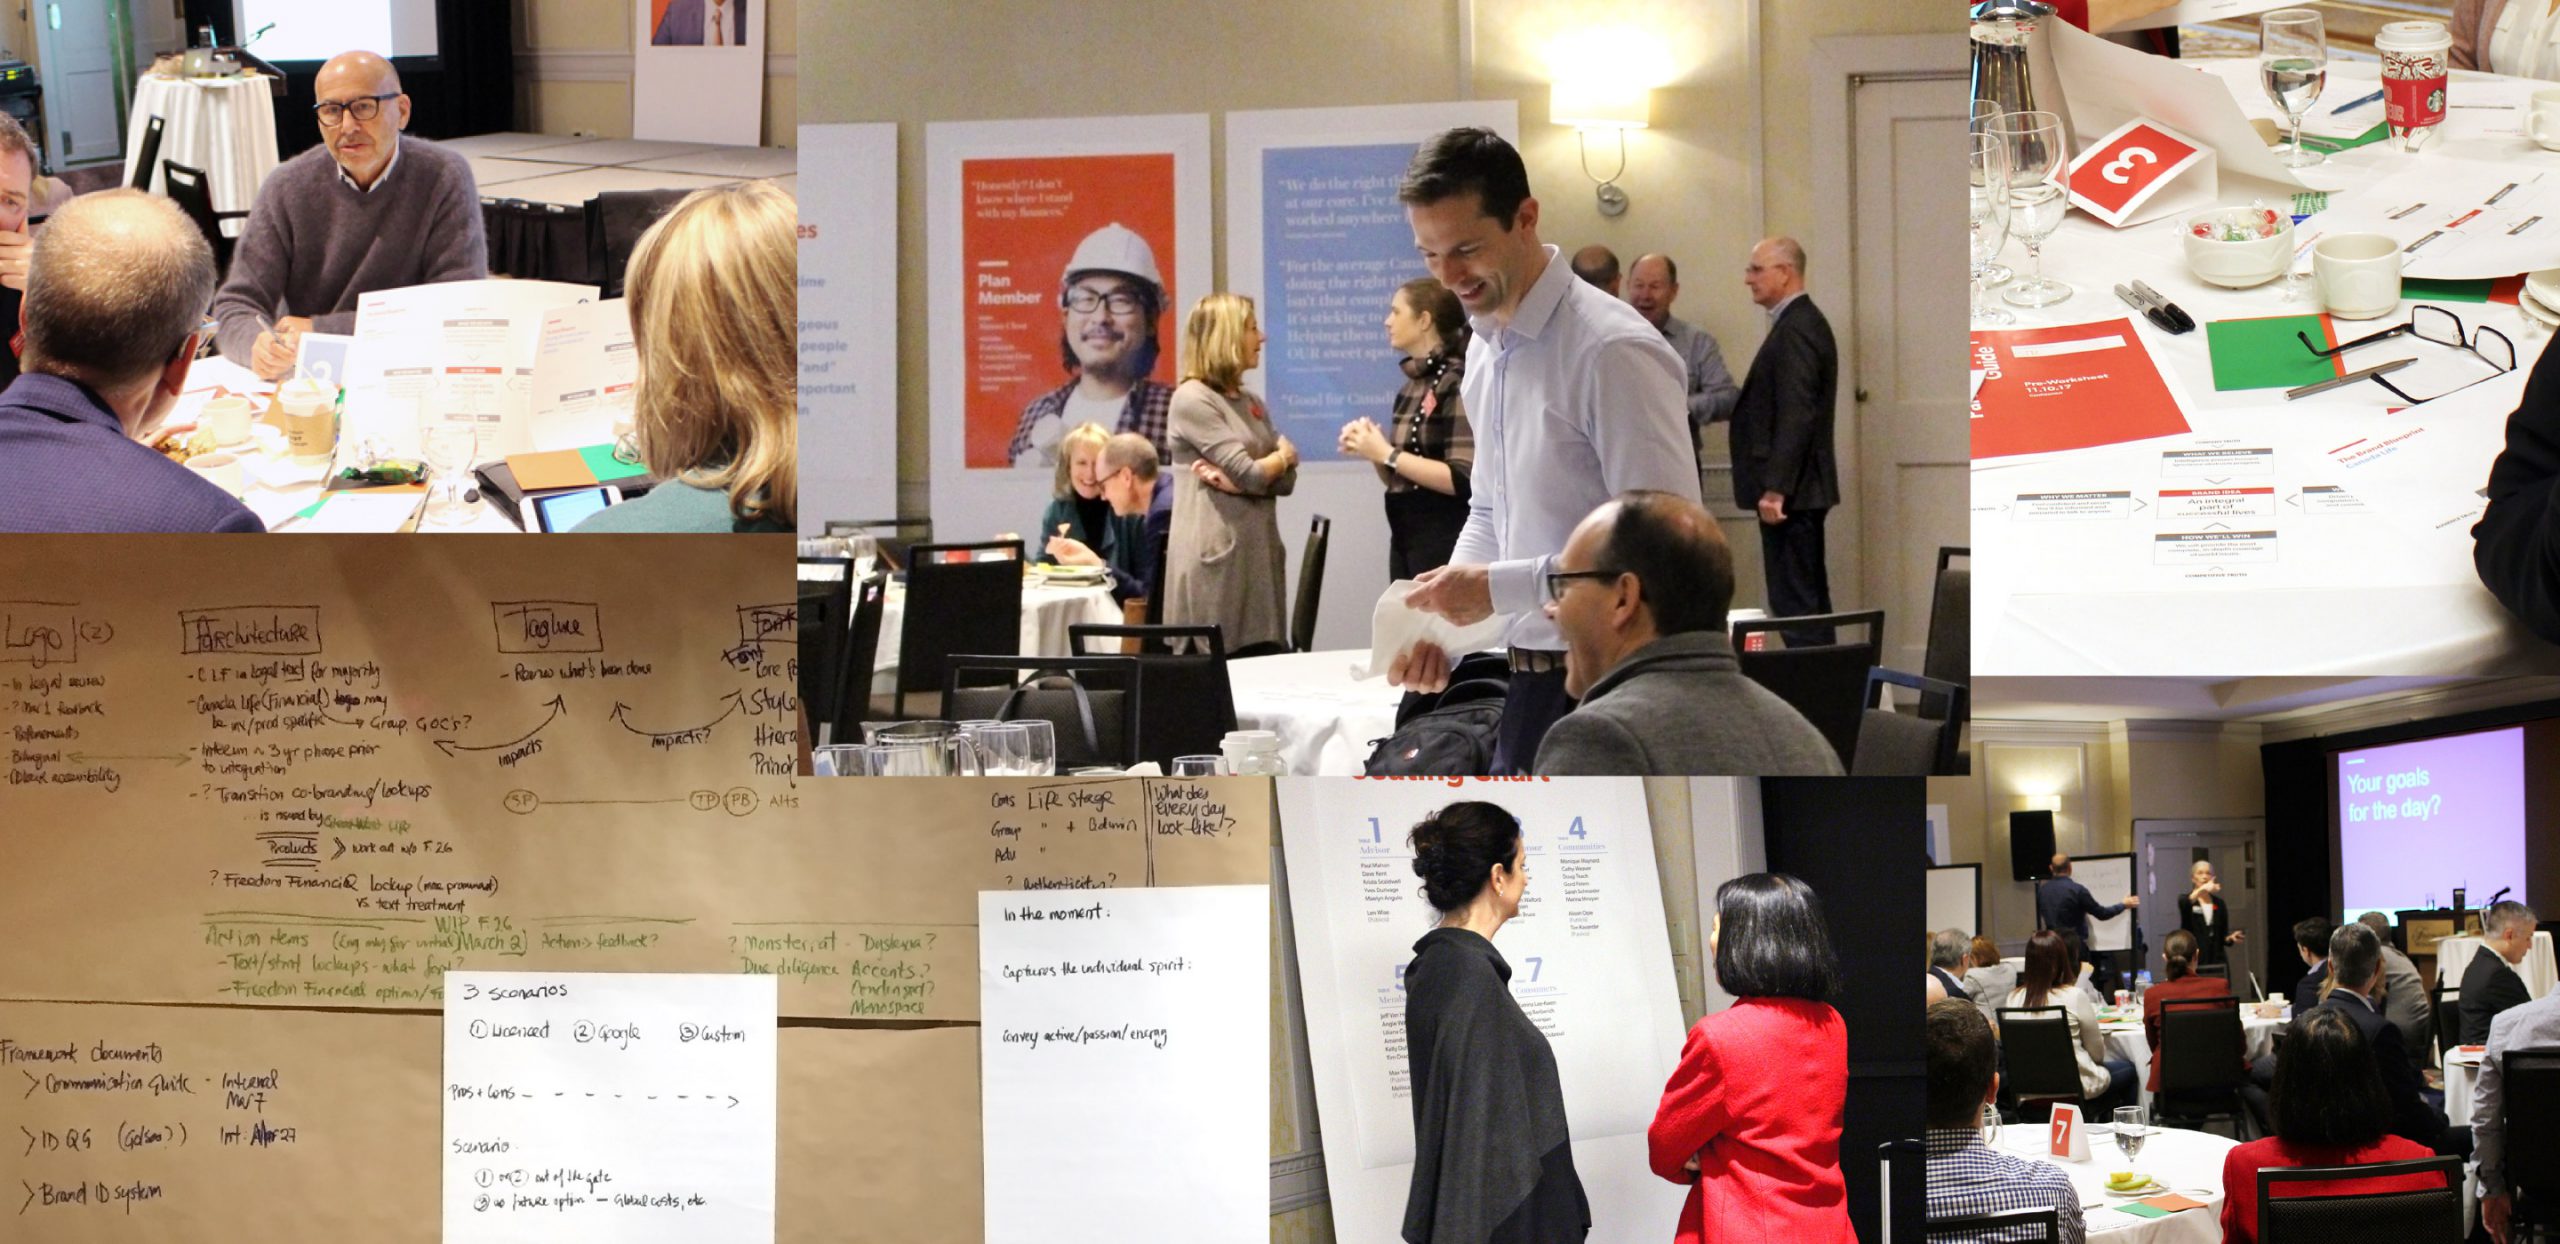 Collage of photos showing interactive sessions and whiteboards with Ove and the Canada Life team.